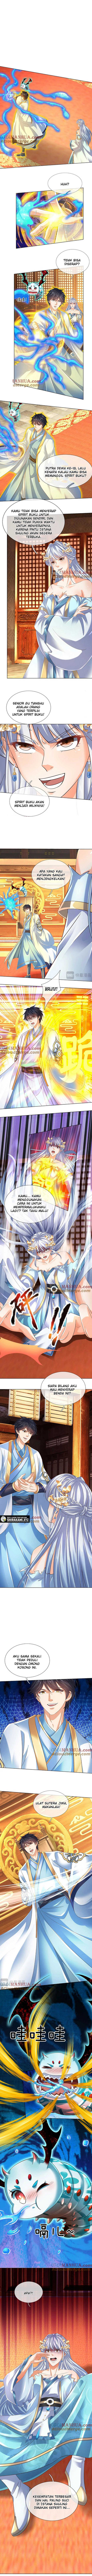 Star Sign In To Supreme Dantian Chapter 296